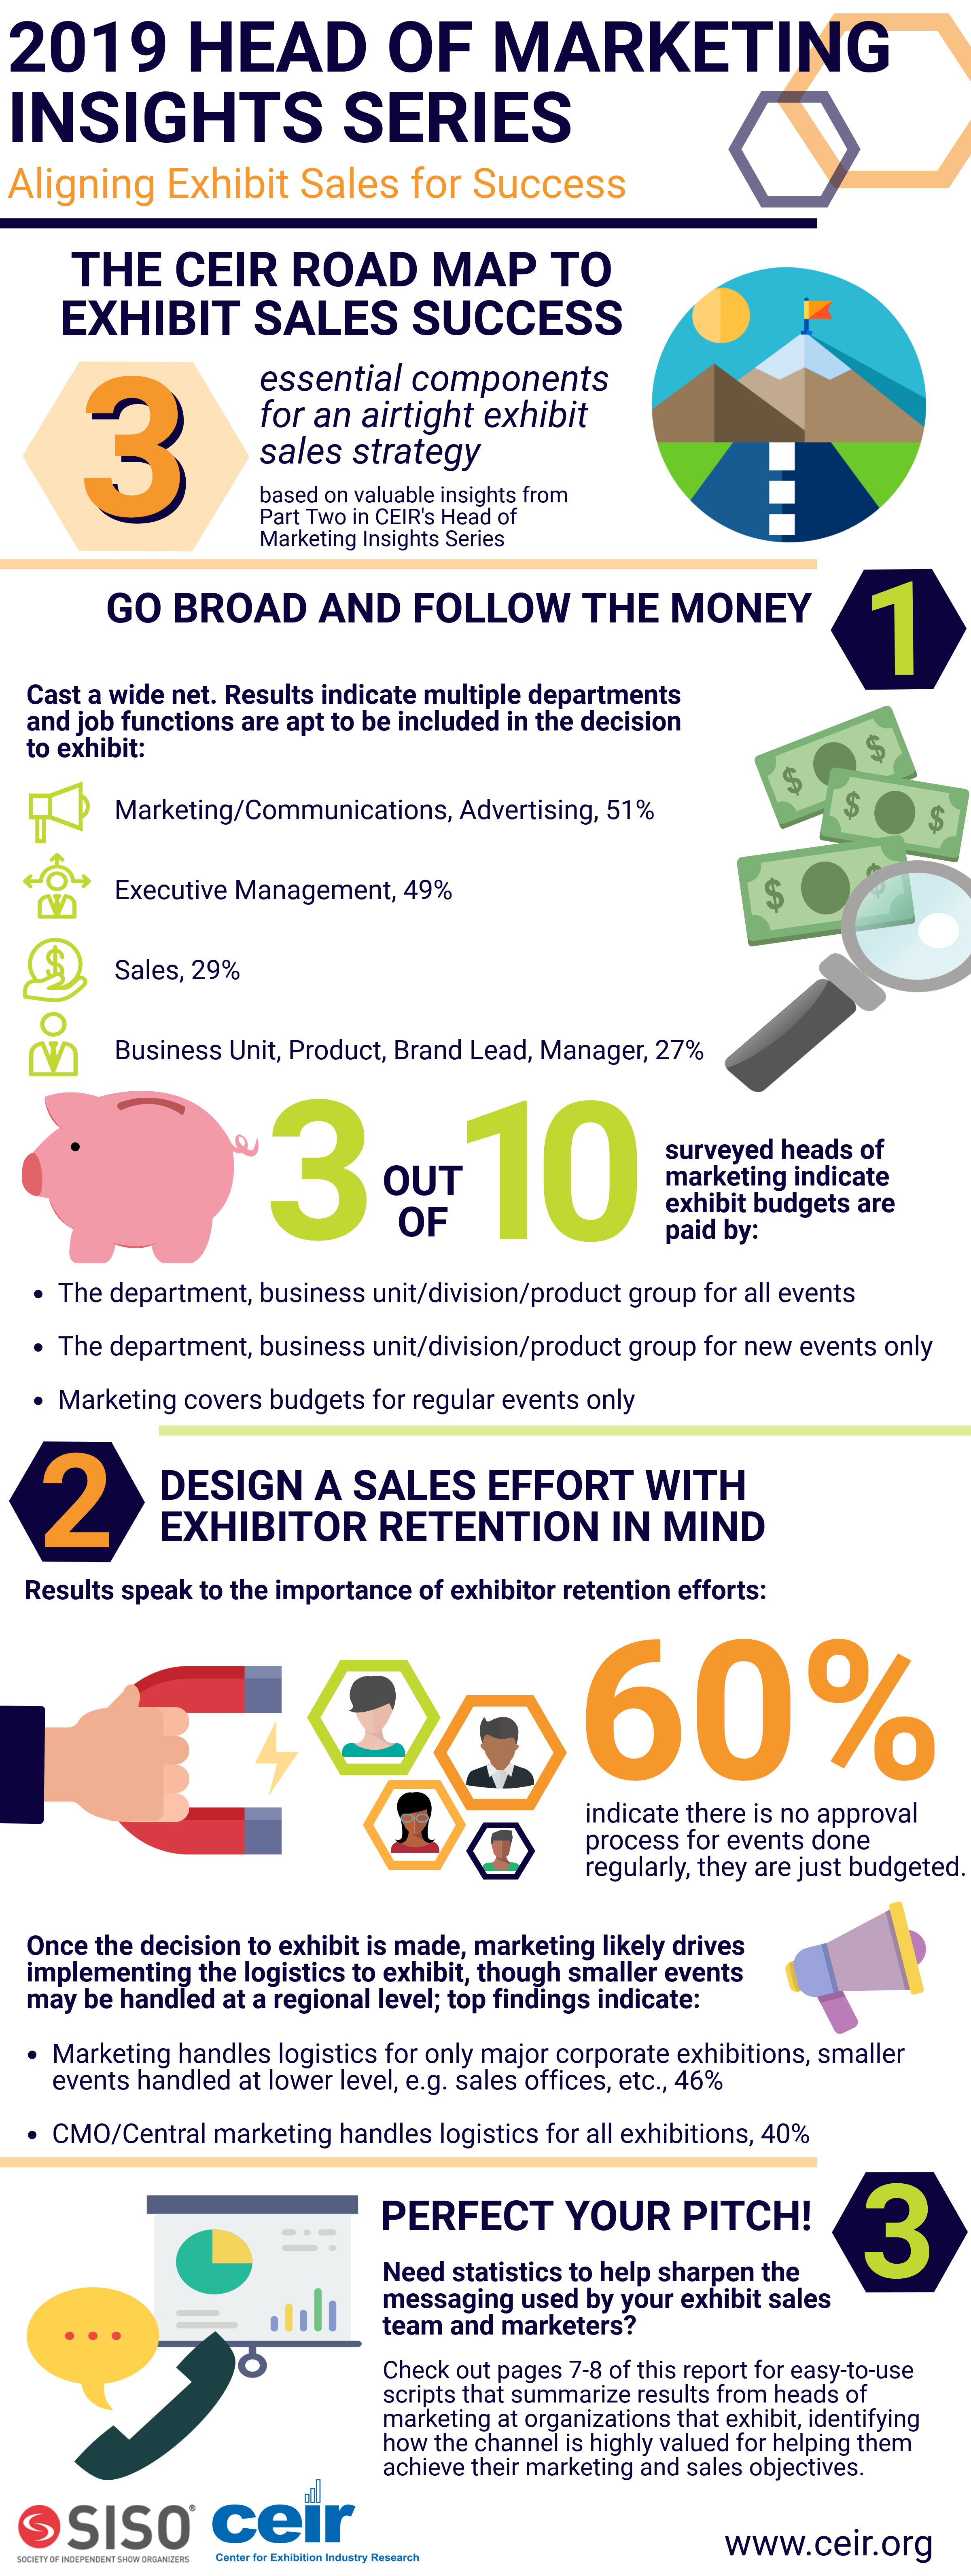 Insights from "Aligning Exhibit Sales for Success"